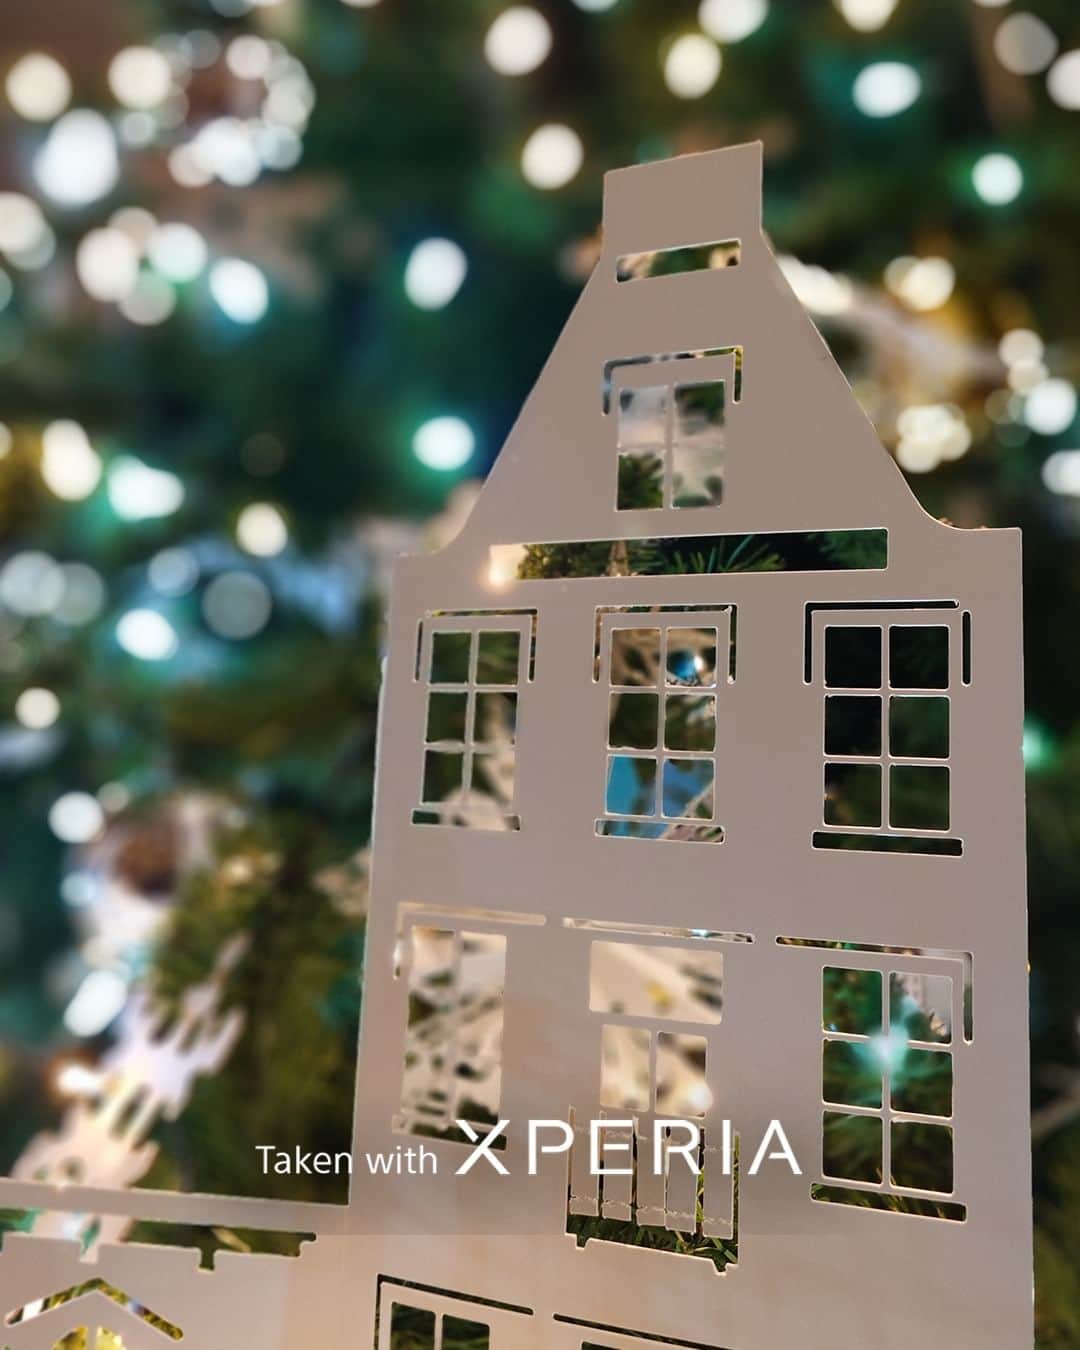 Sony Mobileのインスタグラム：「Happy holidays from Xperia!🎄  If you want beautifully clear shots of shining lights in the cold winter air, Xperia's natural bokeh mode gives your subjects incredible clarity.  #Sony #Xperia #SonyXperia #Xperia1V #Xperia5V #CaptureTheNight #TakenWithXperia」